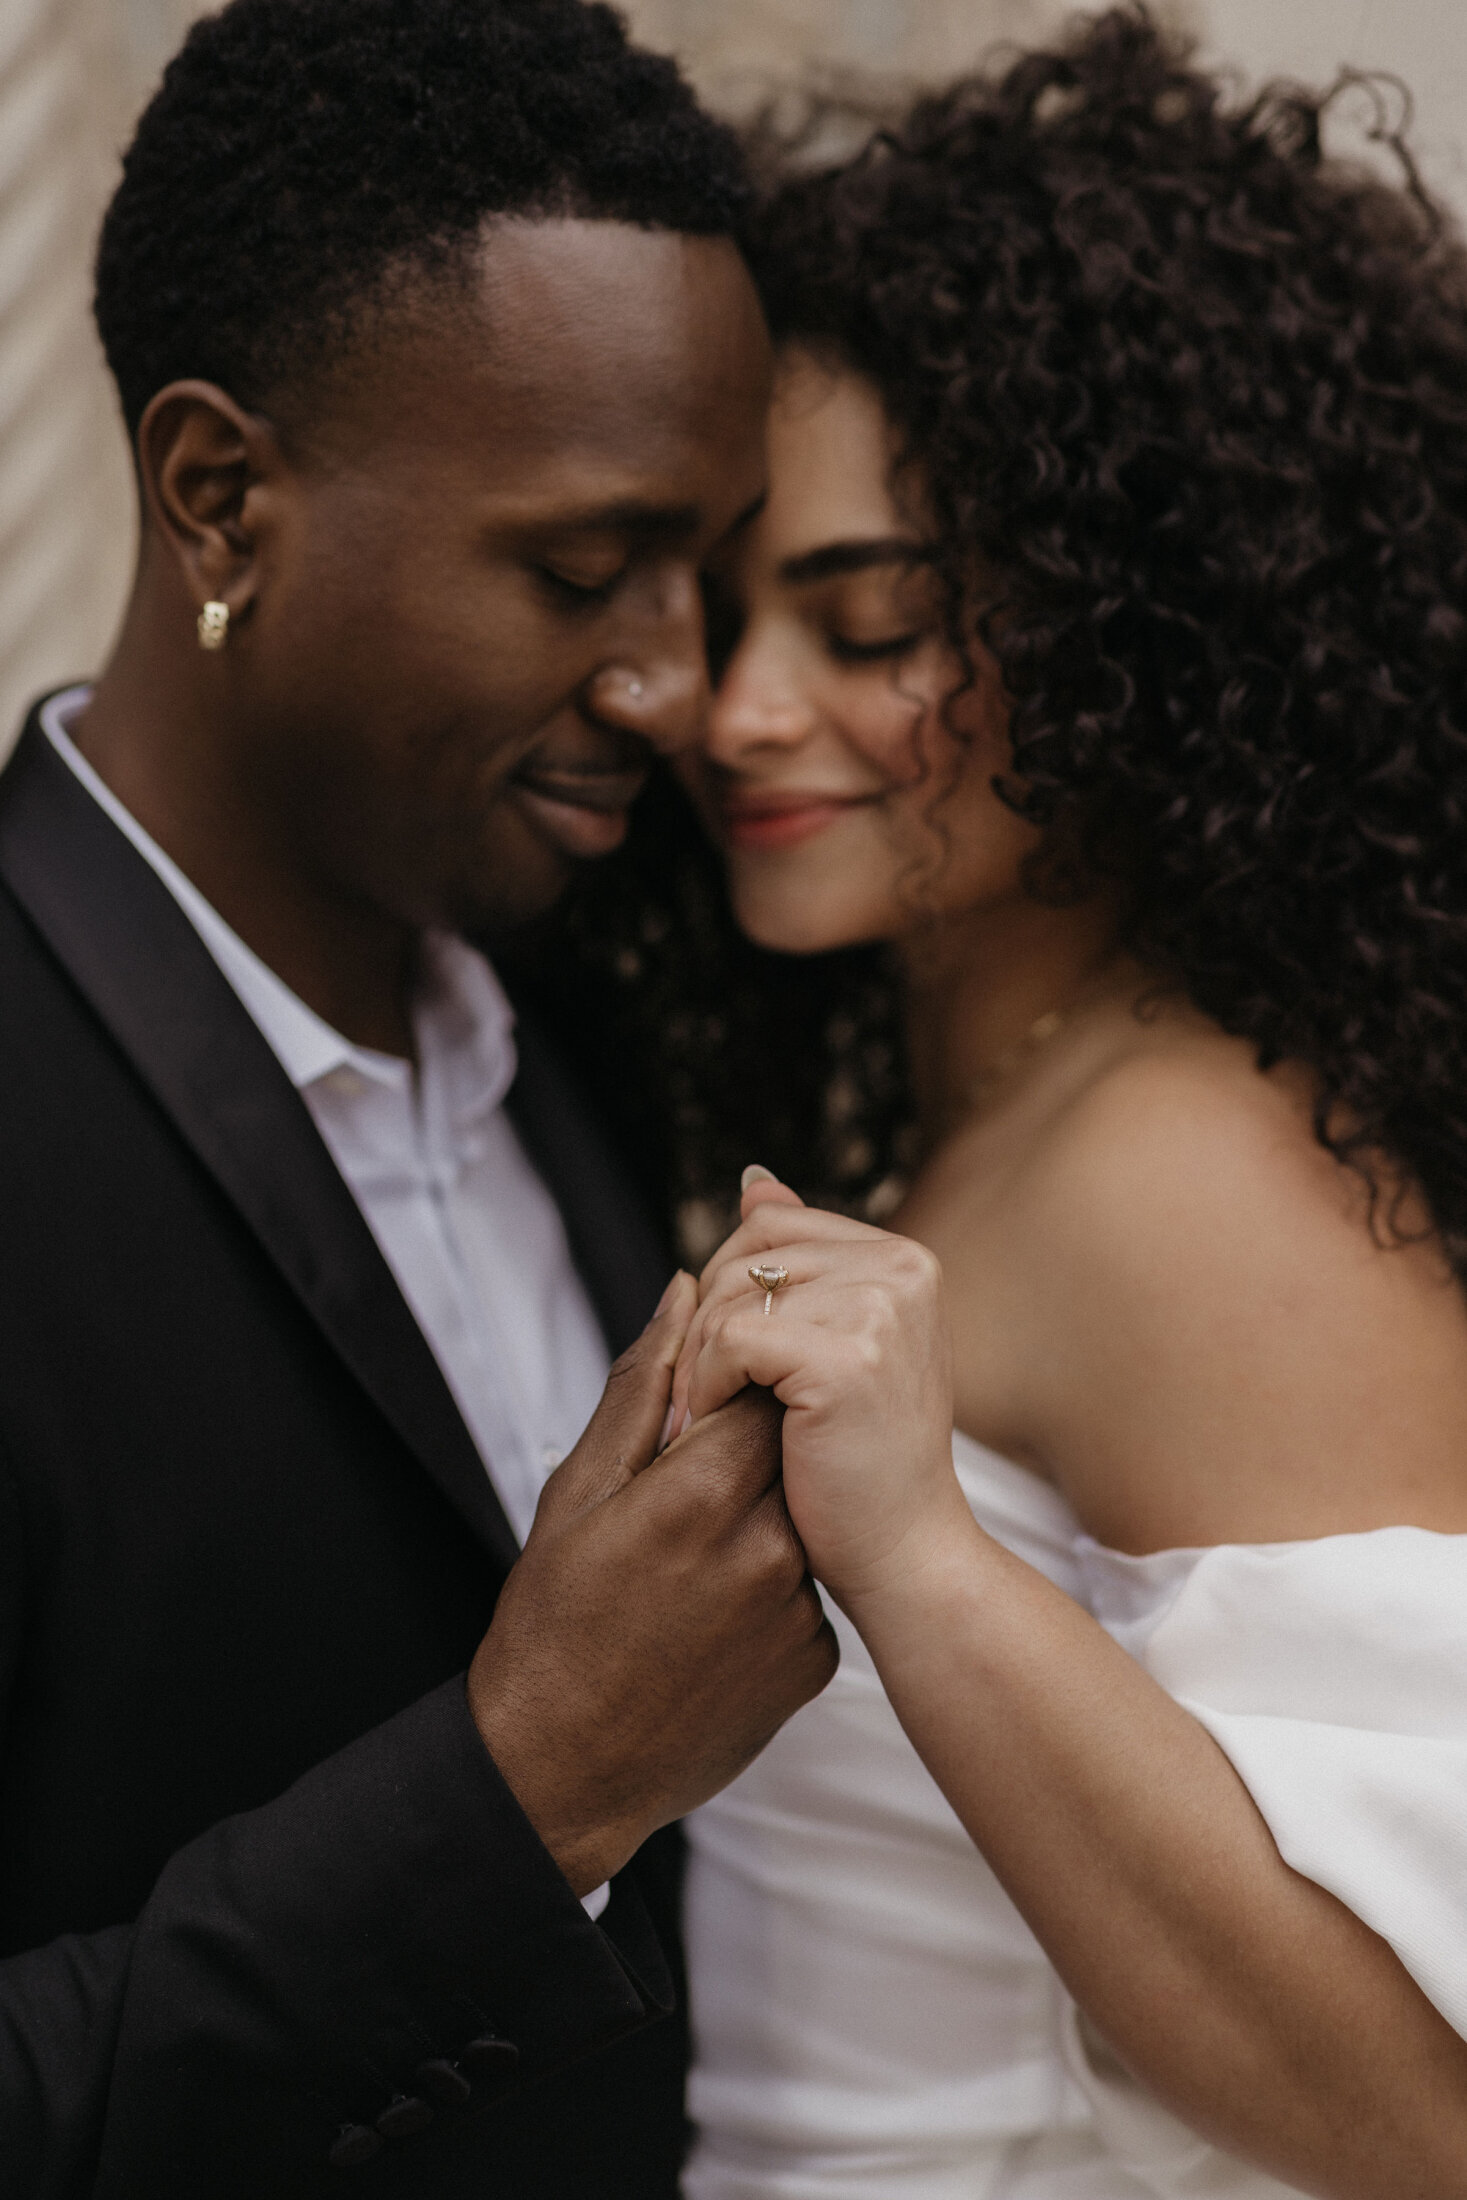 A tender moment during an engagement photoshoot in San Francisco, capturing a  man in a black suit and a woman with curly hair in a white dress, as they hold hands and lean close together